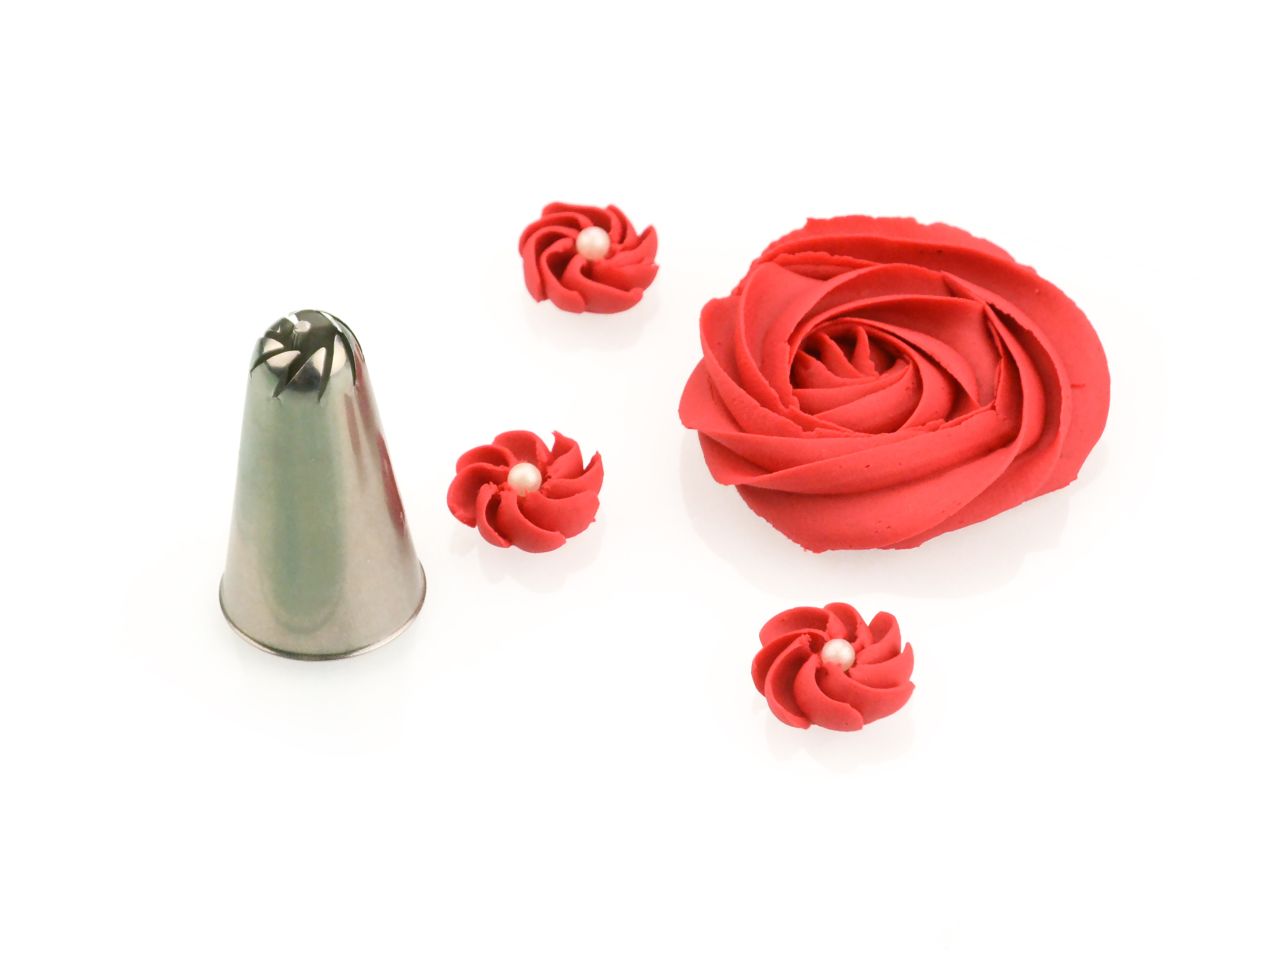 Nozzle rose stainless steel